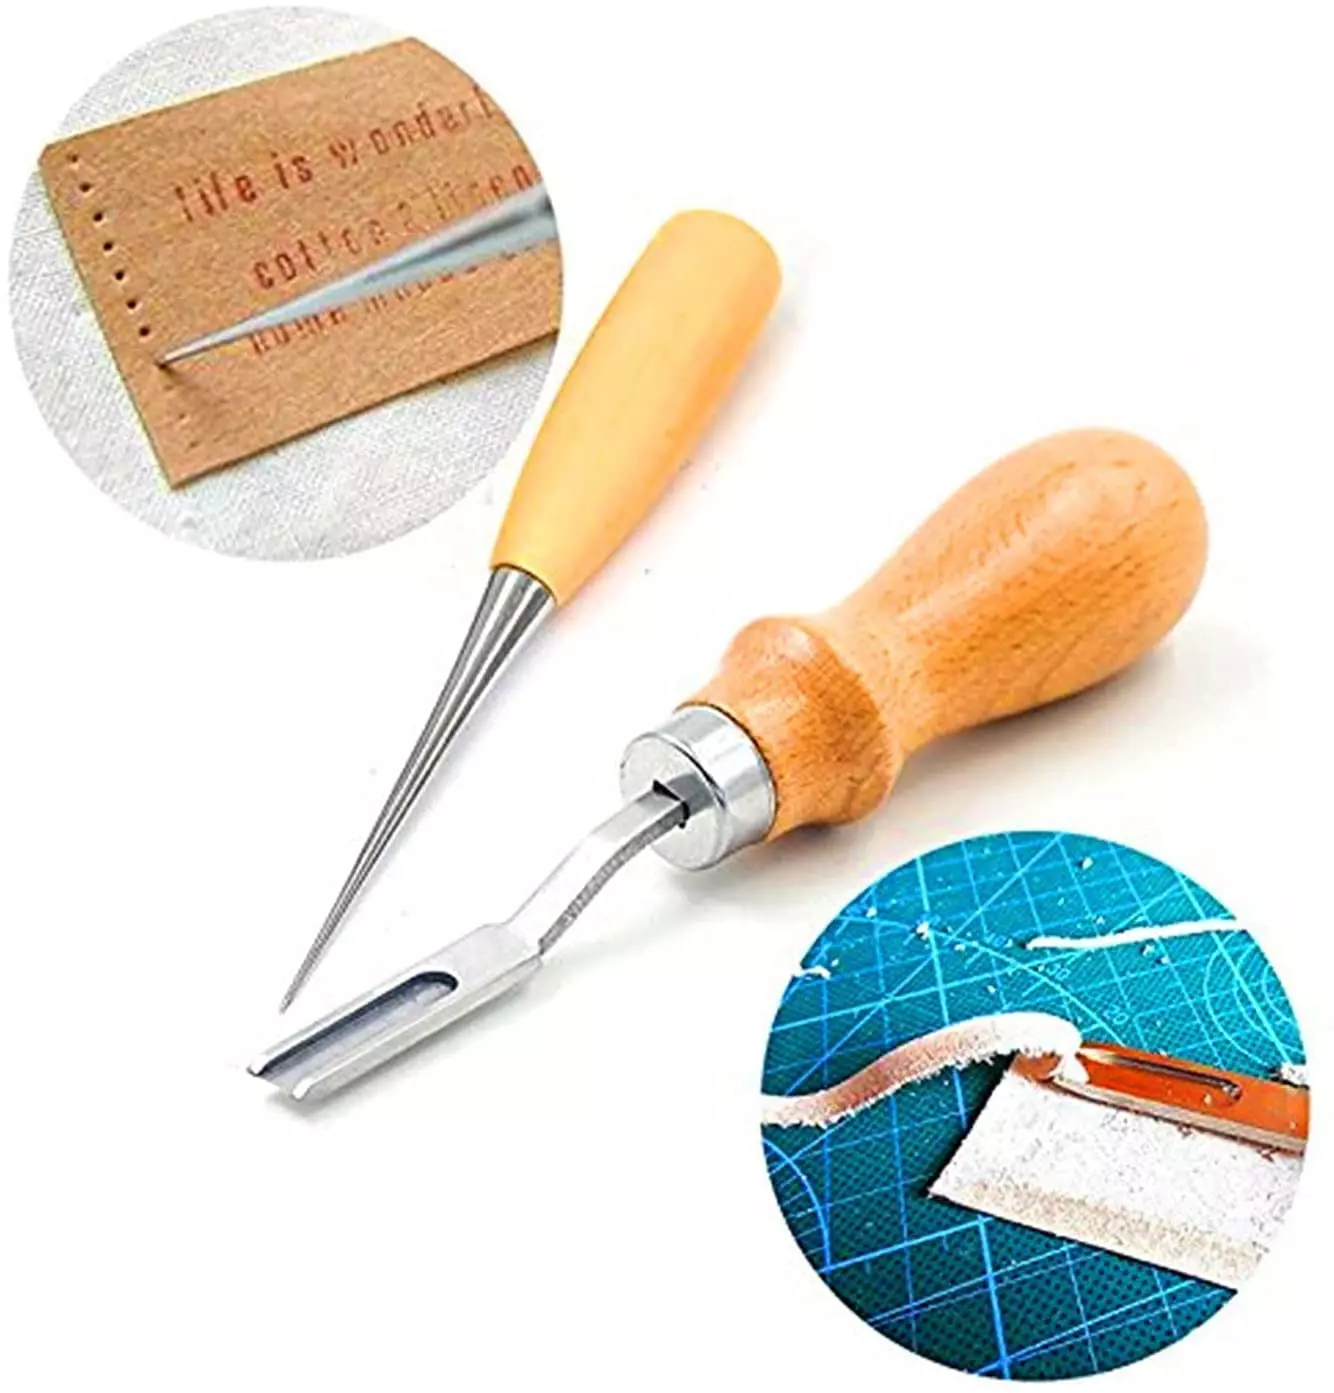  19Pcs Leather Working Tools, Leather Tooling Kit for